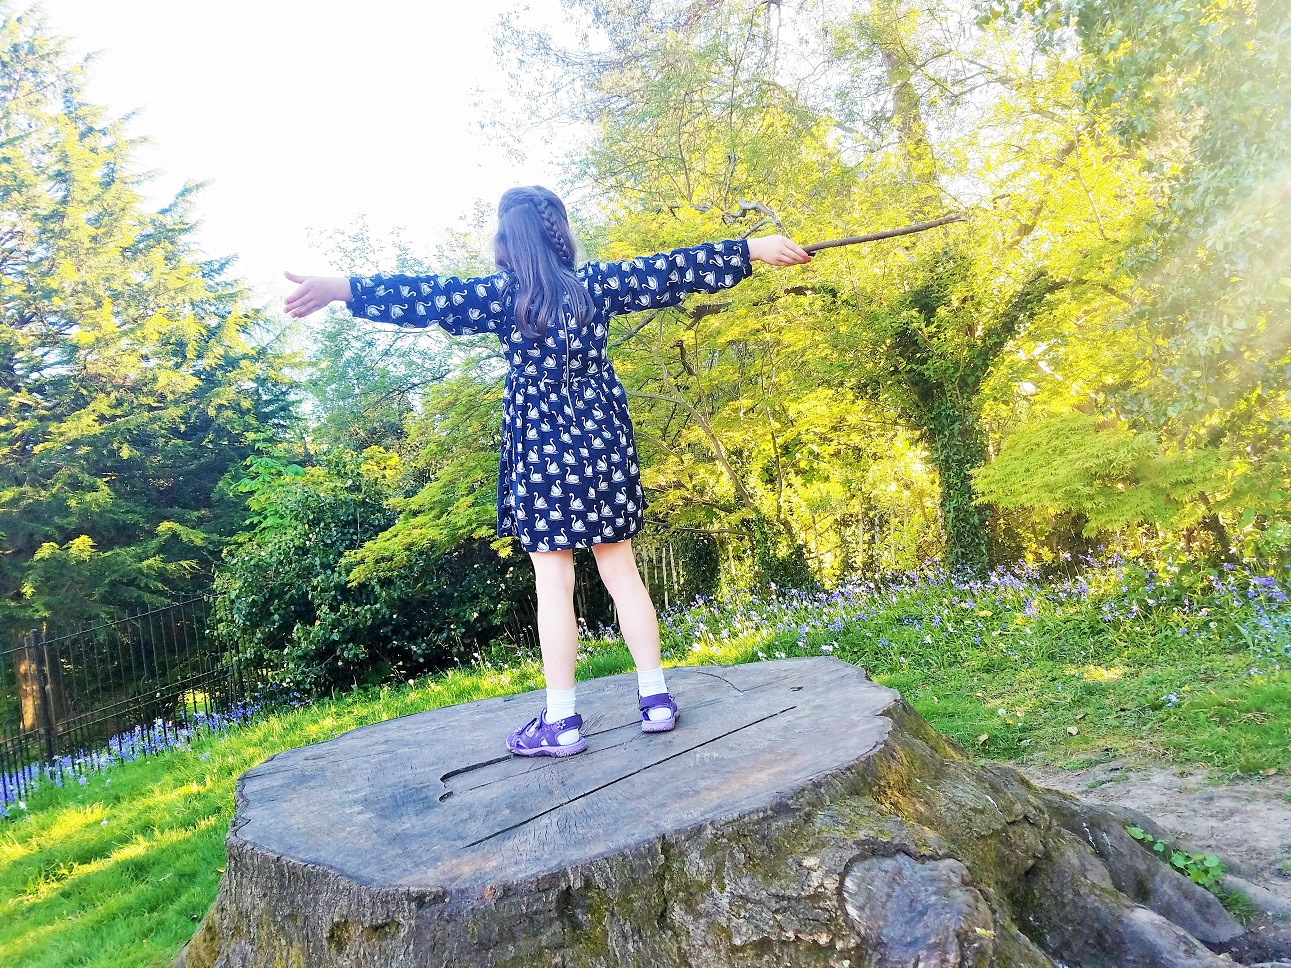 The end of key stage 1 and the stress of SATs - child in navy blue dress standing on large tree stump